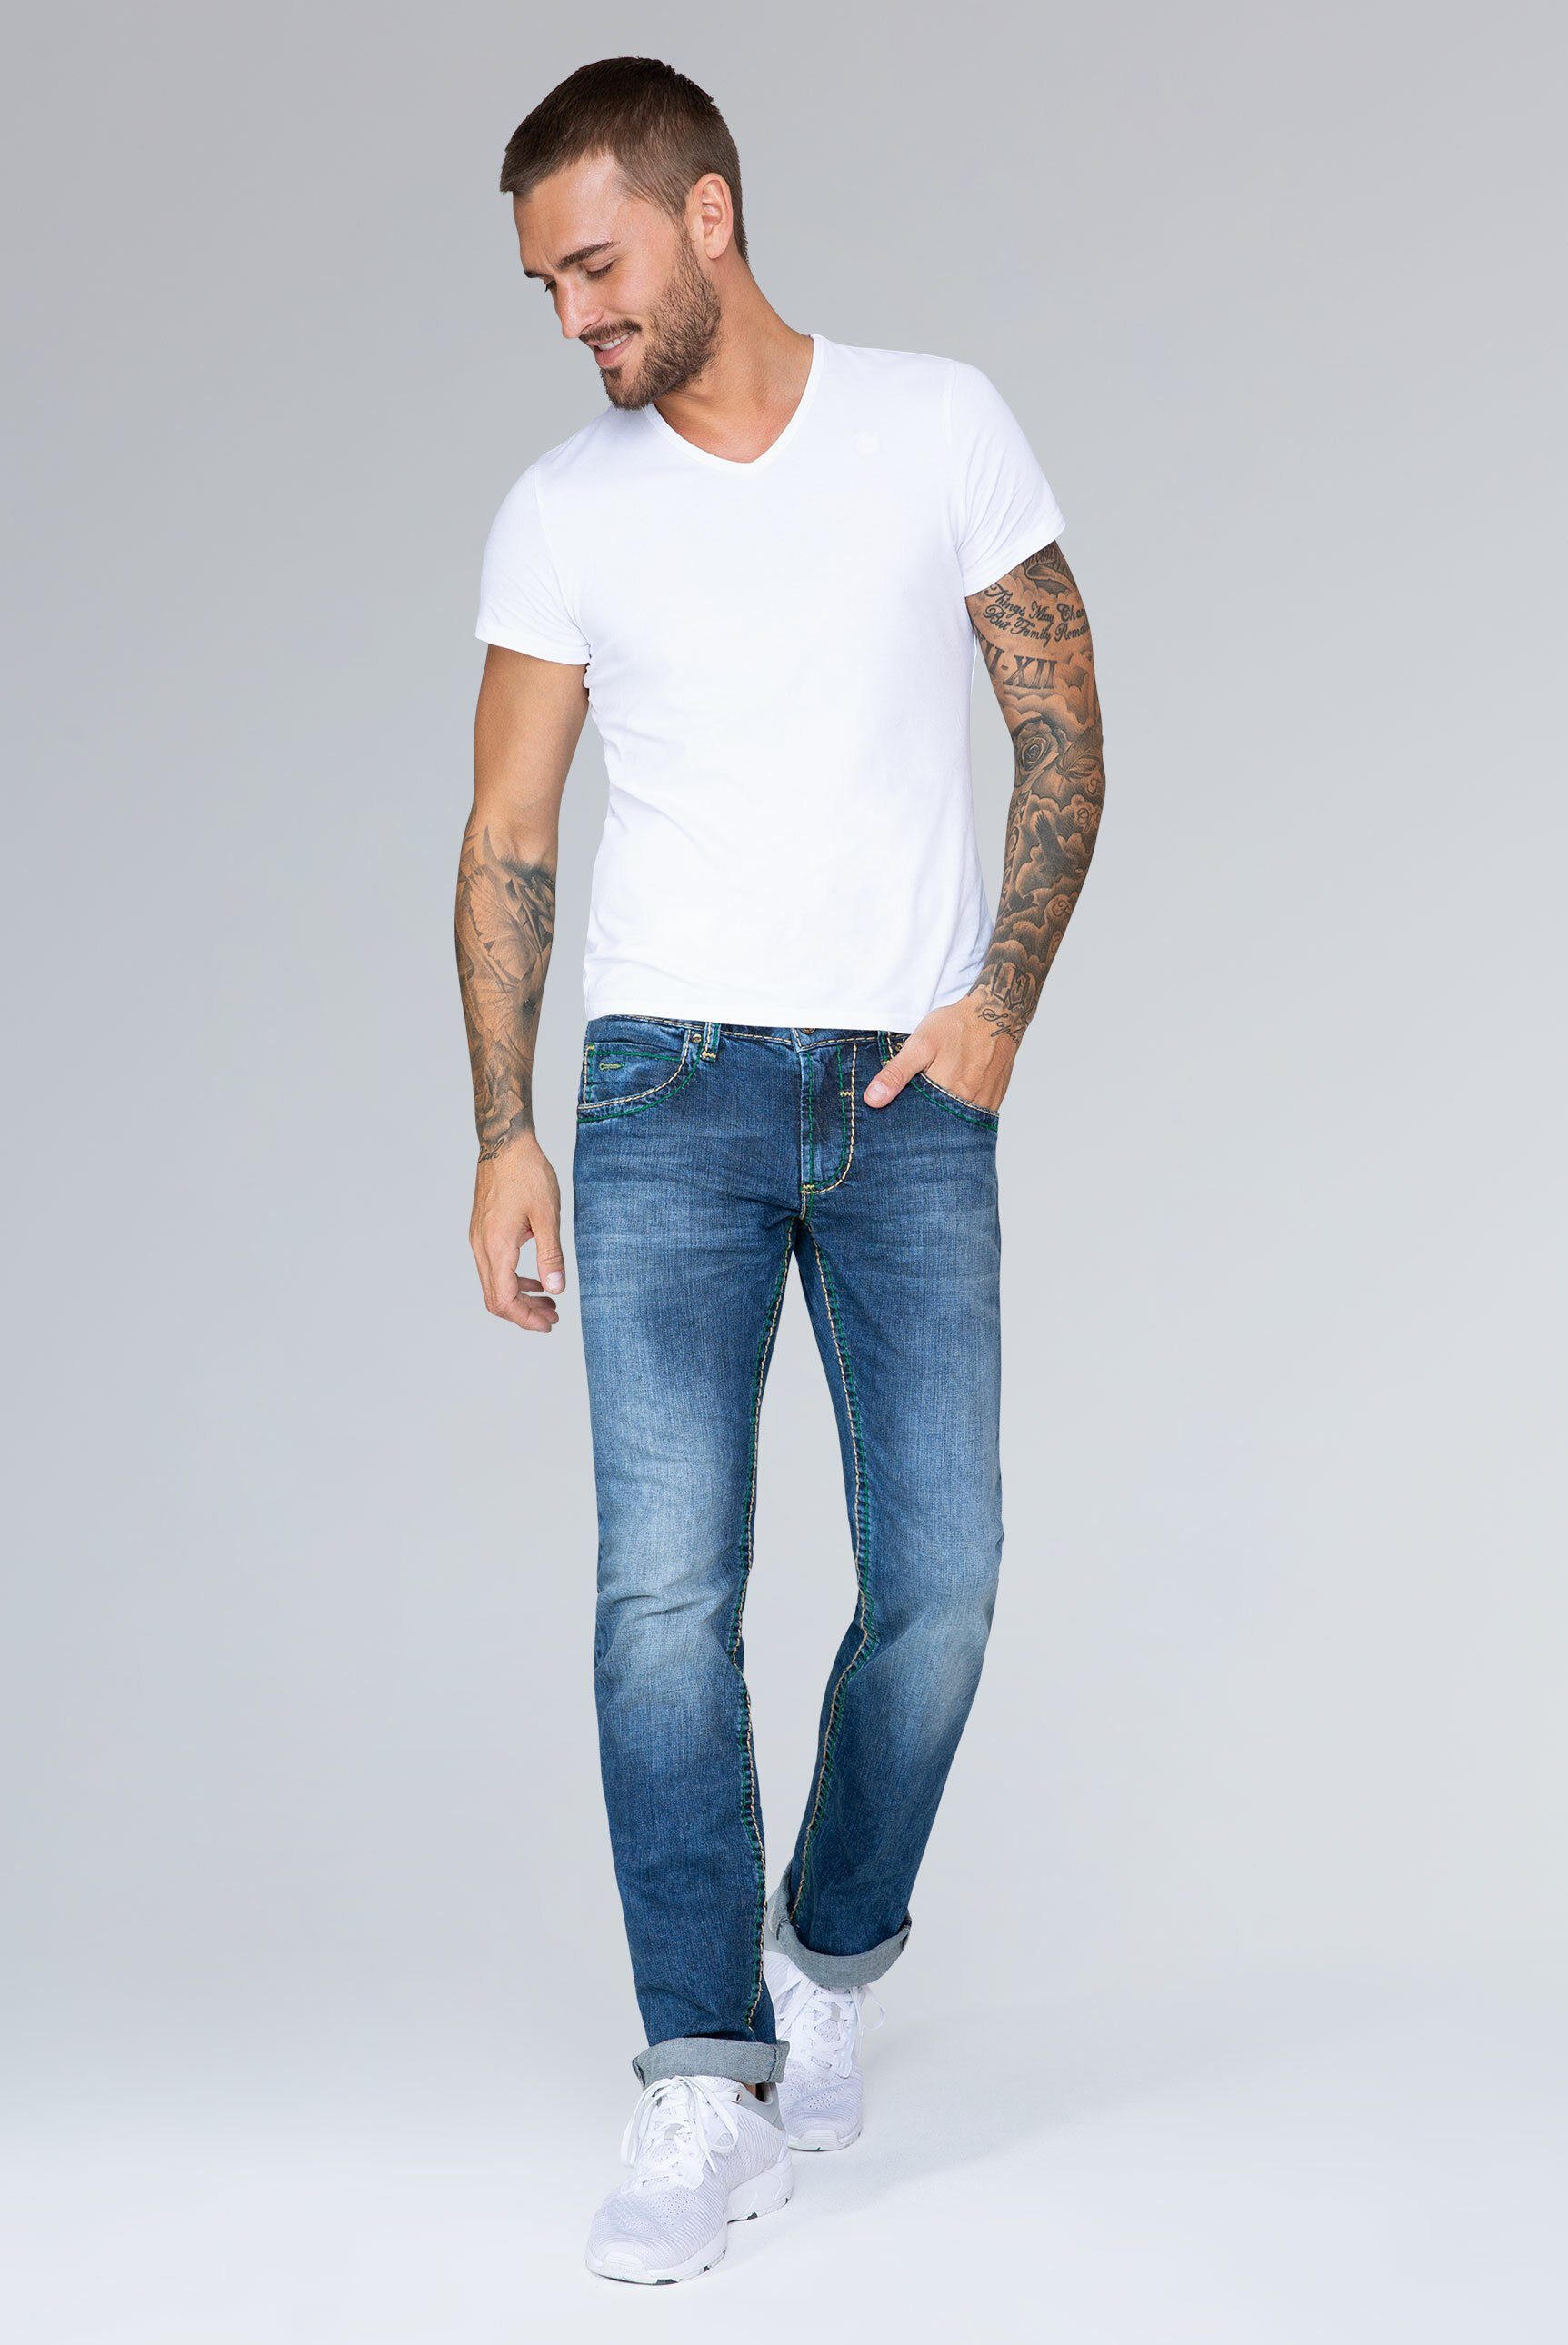 CAMP DAVID Regular-fit-Jeans NI:CO Used-Waschung mit